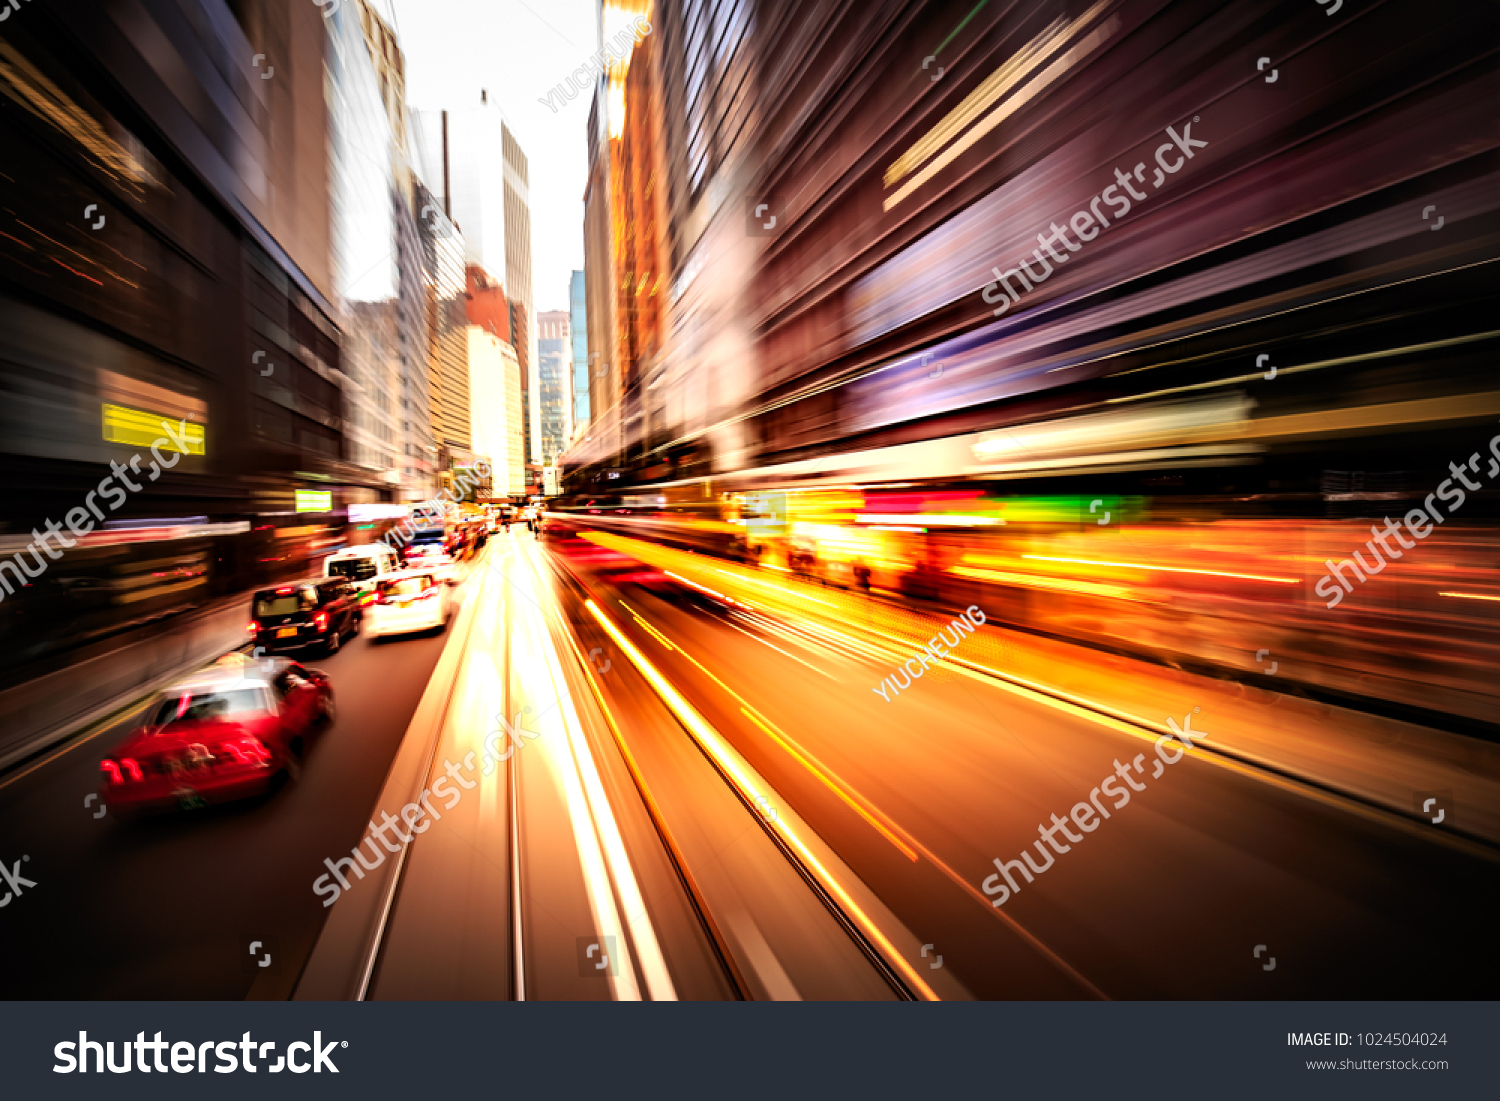 Abstract motion blur image of Hong Kong city street FOV from moving tram #1024504024